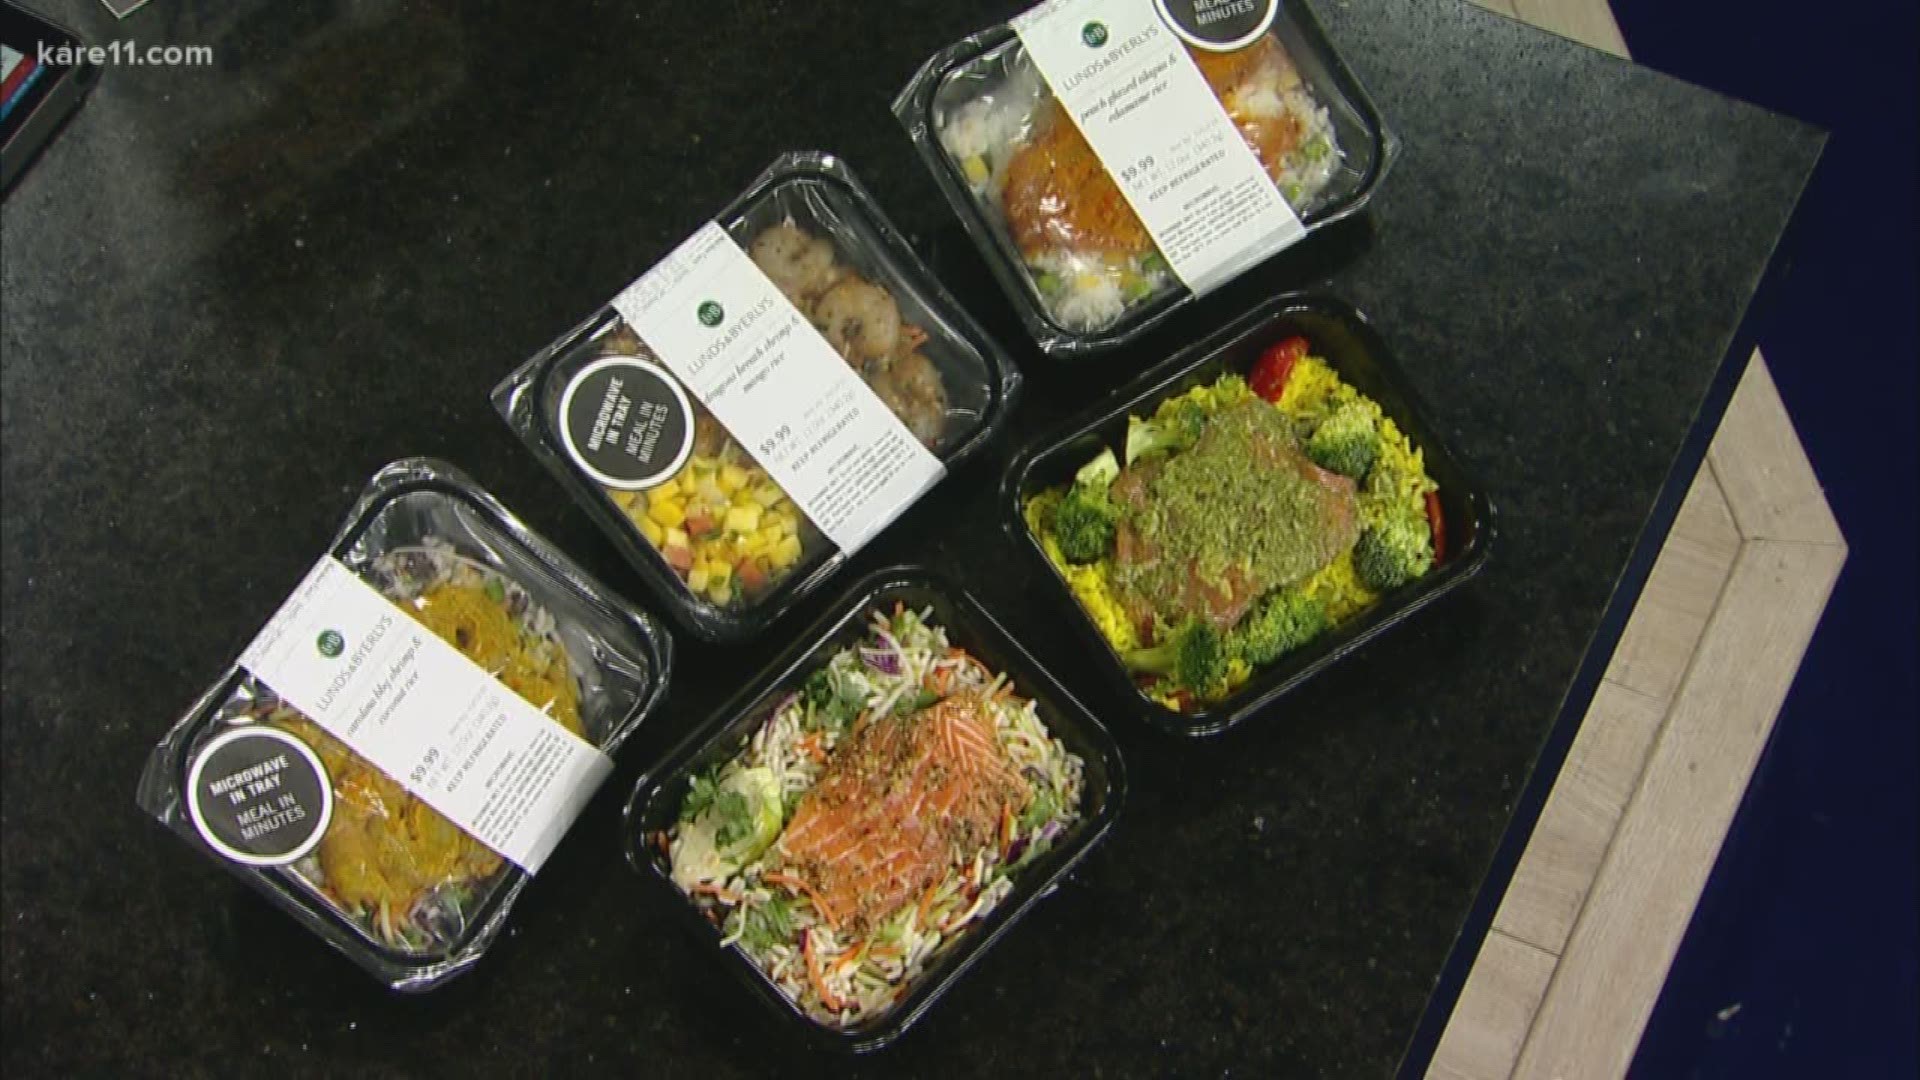 Lunds & Byerlys Executive Chef Michael Selby has your dinner plans taken care of.